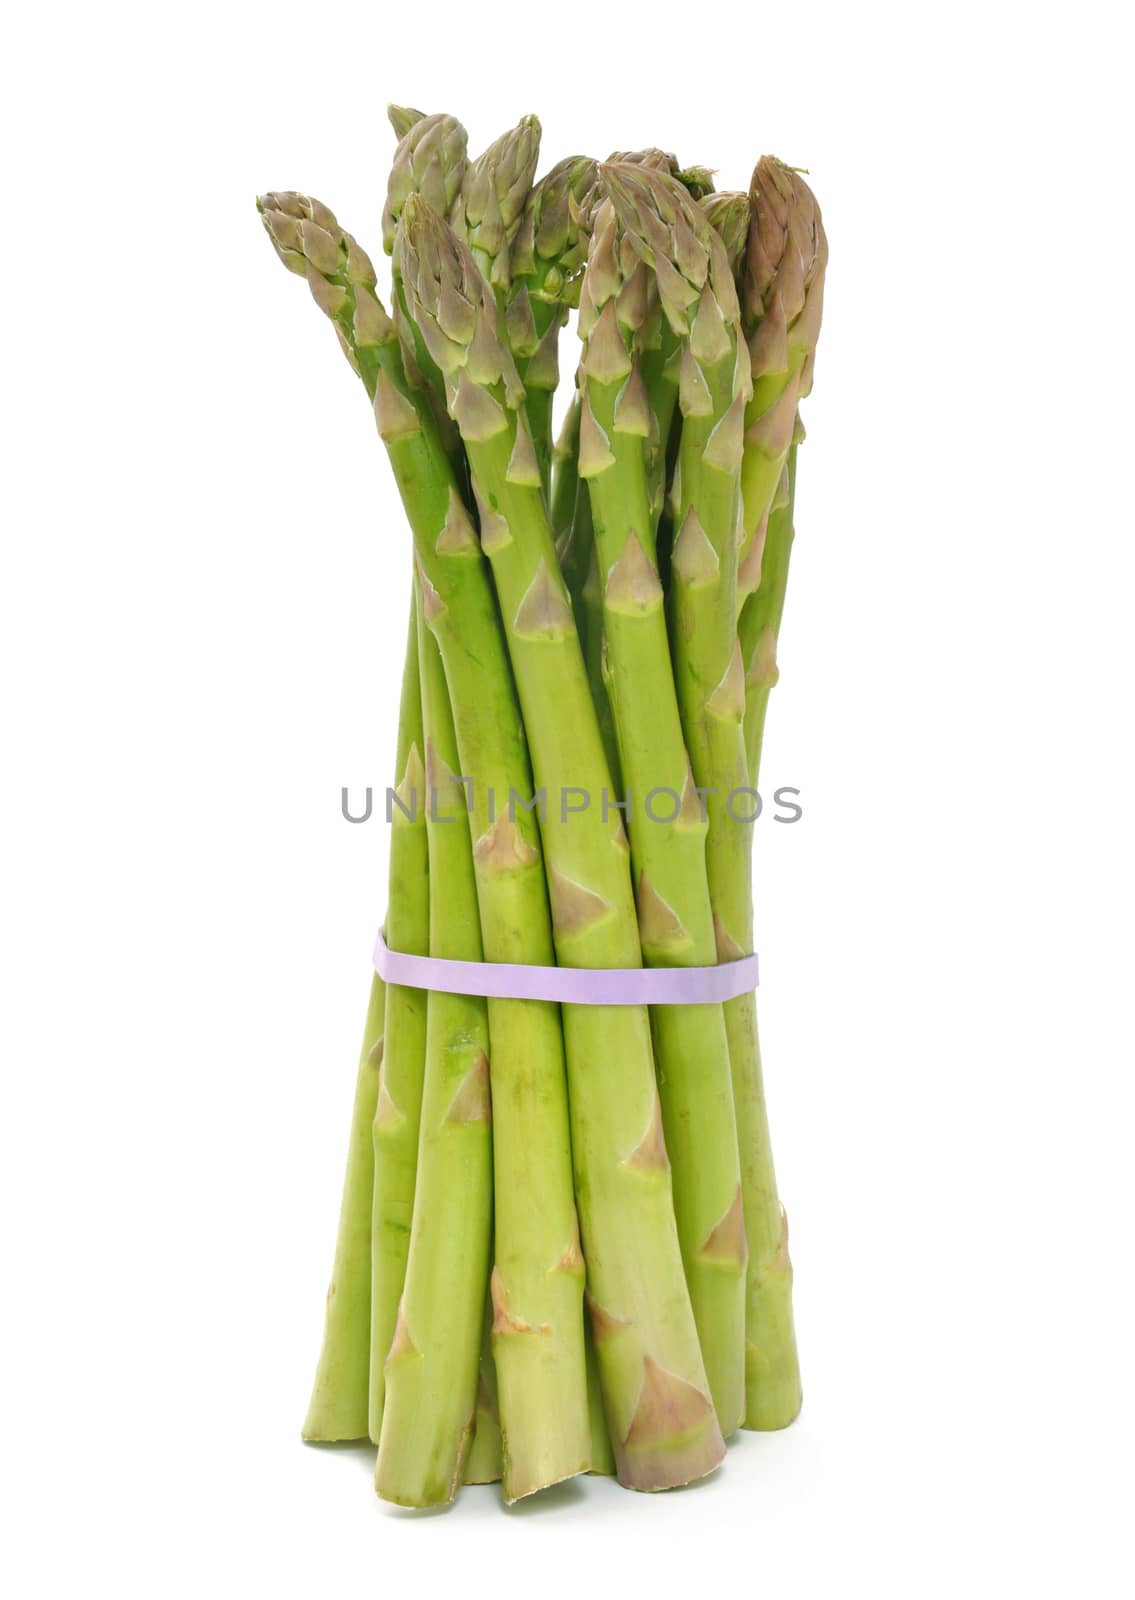 Bunch of asparagus standing against a white background